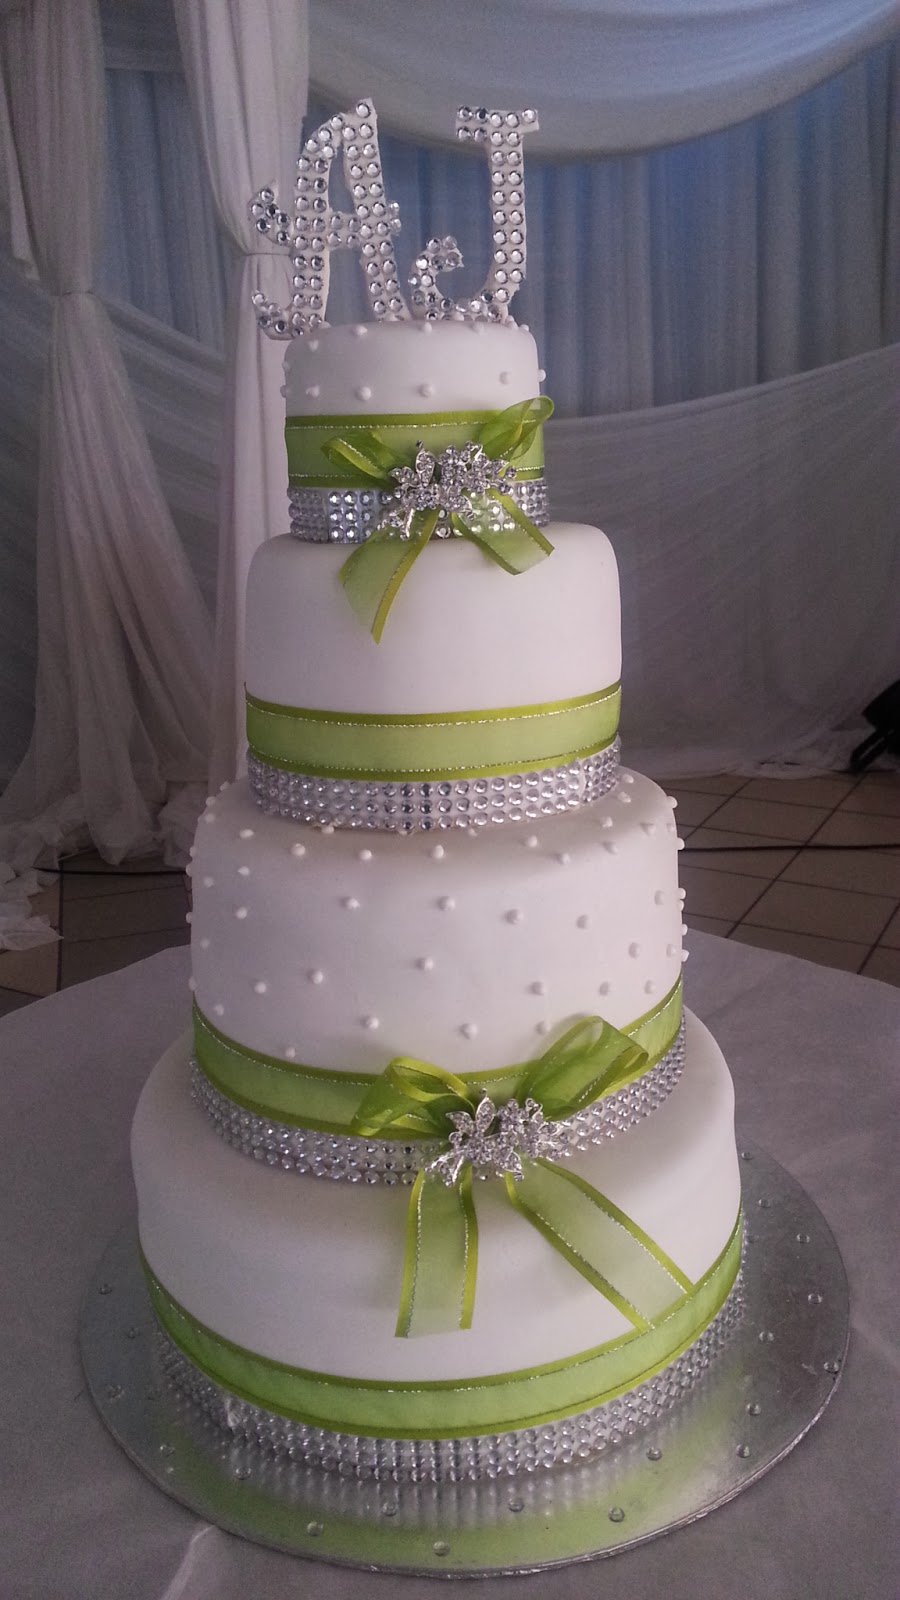 Lulu Belle Cakes: How about some bling! Wedding cake